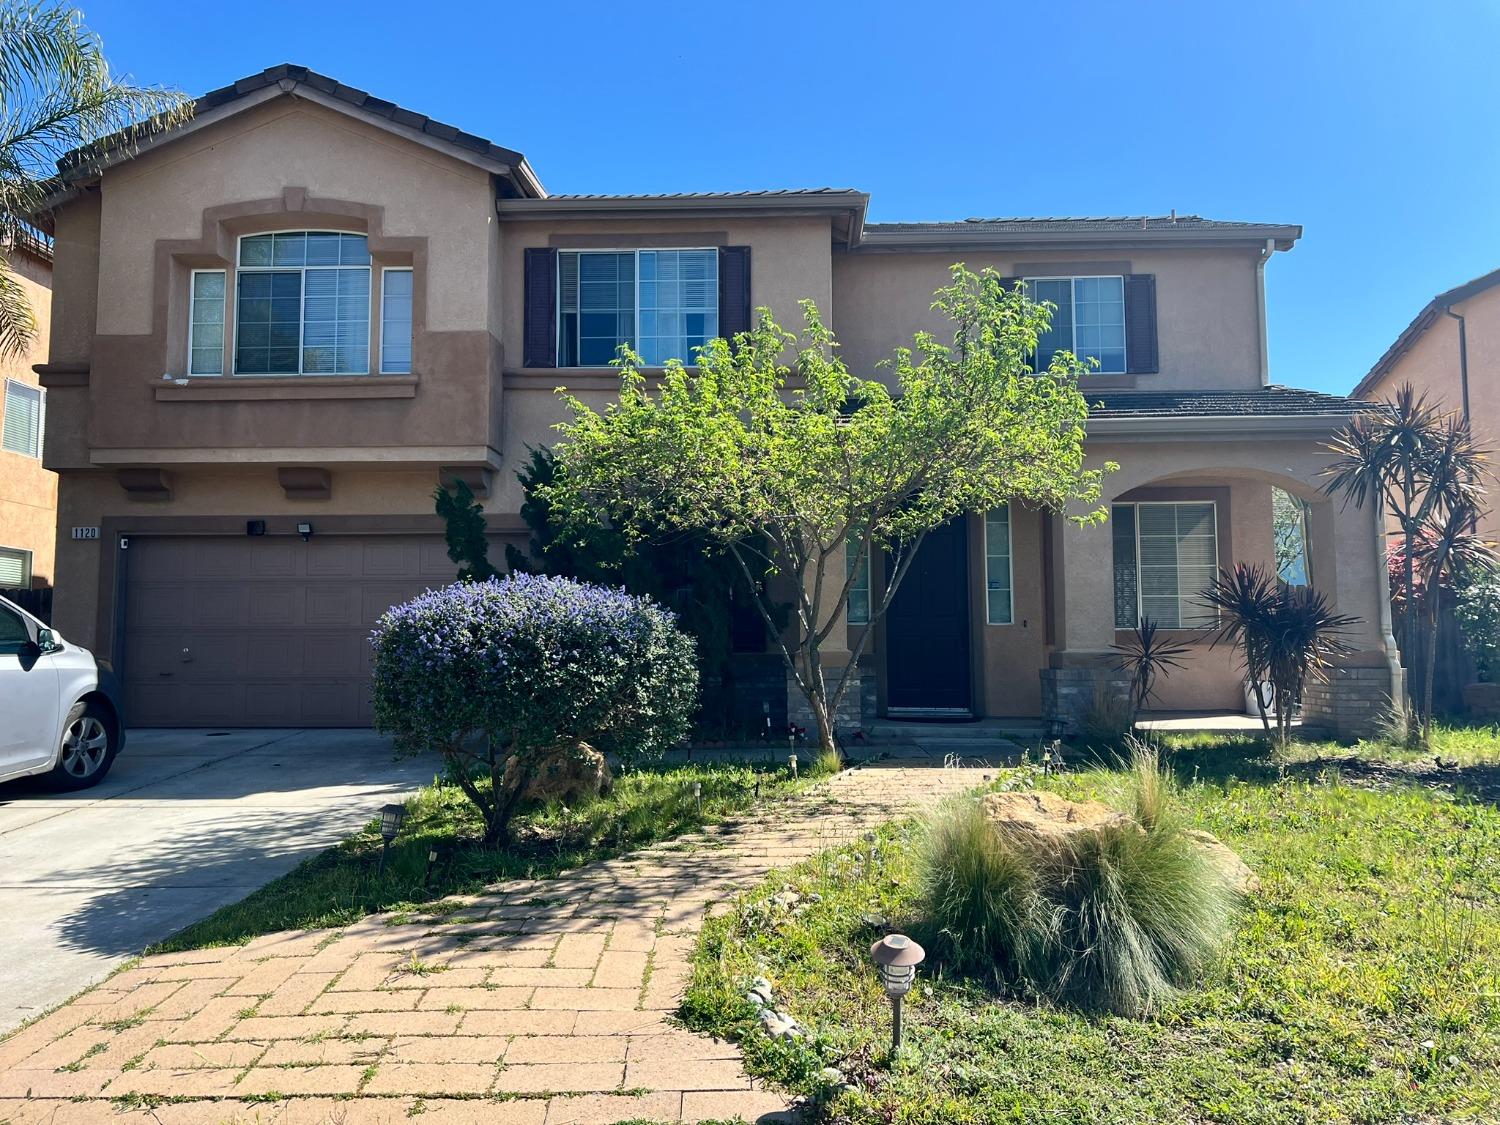 Photo of 1120 Whispering Wind Dr in Tracy, CA